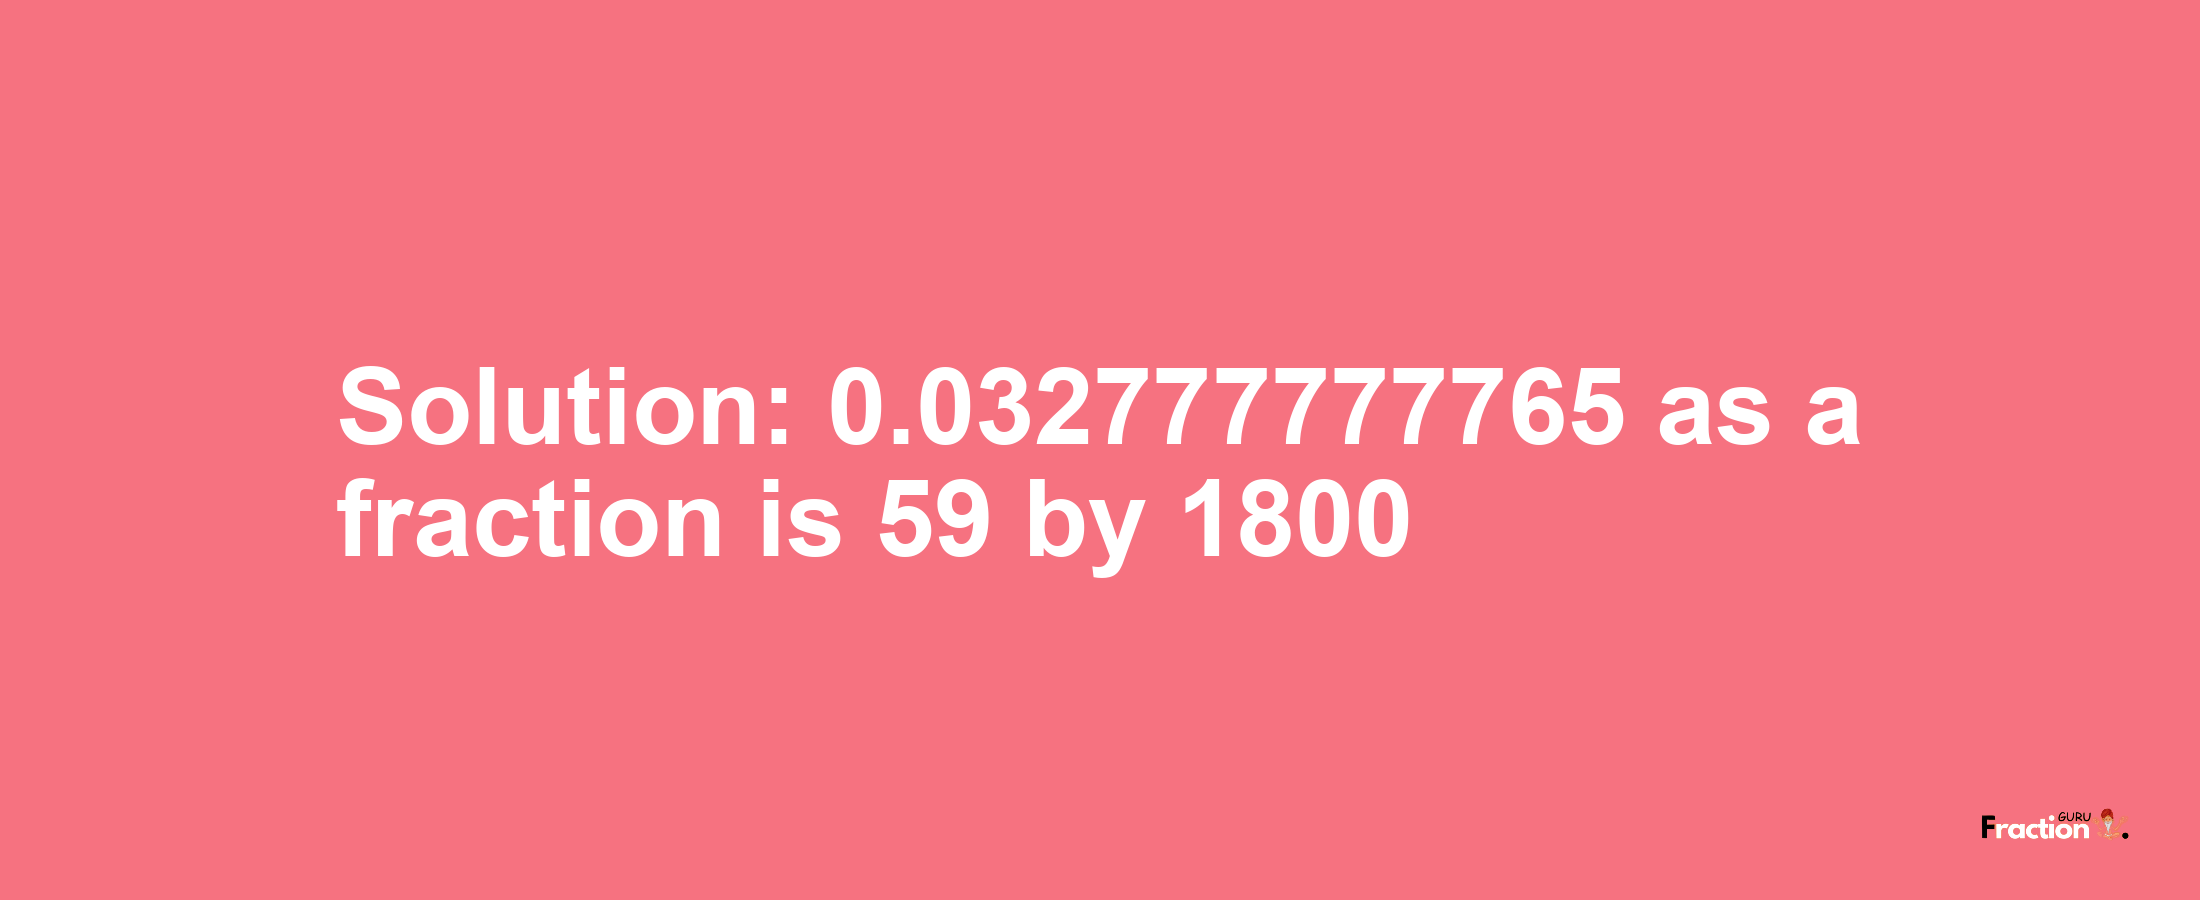 Solution:0.032777777765 as a fraction is 59/1800